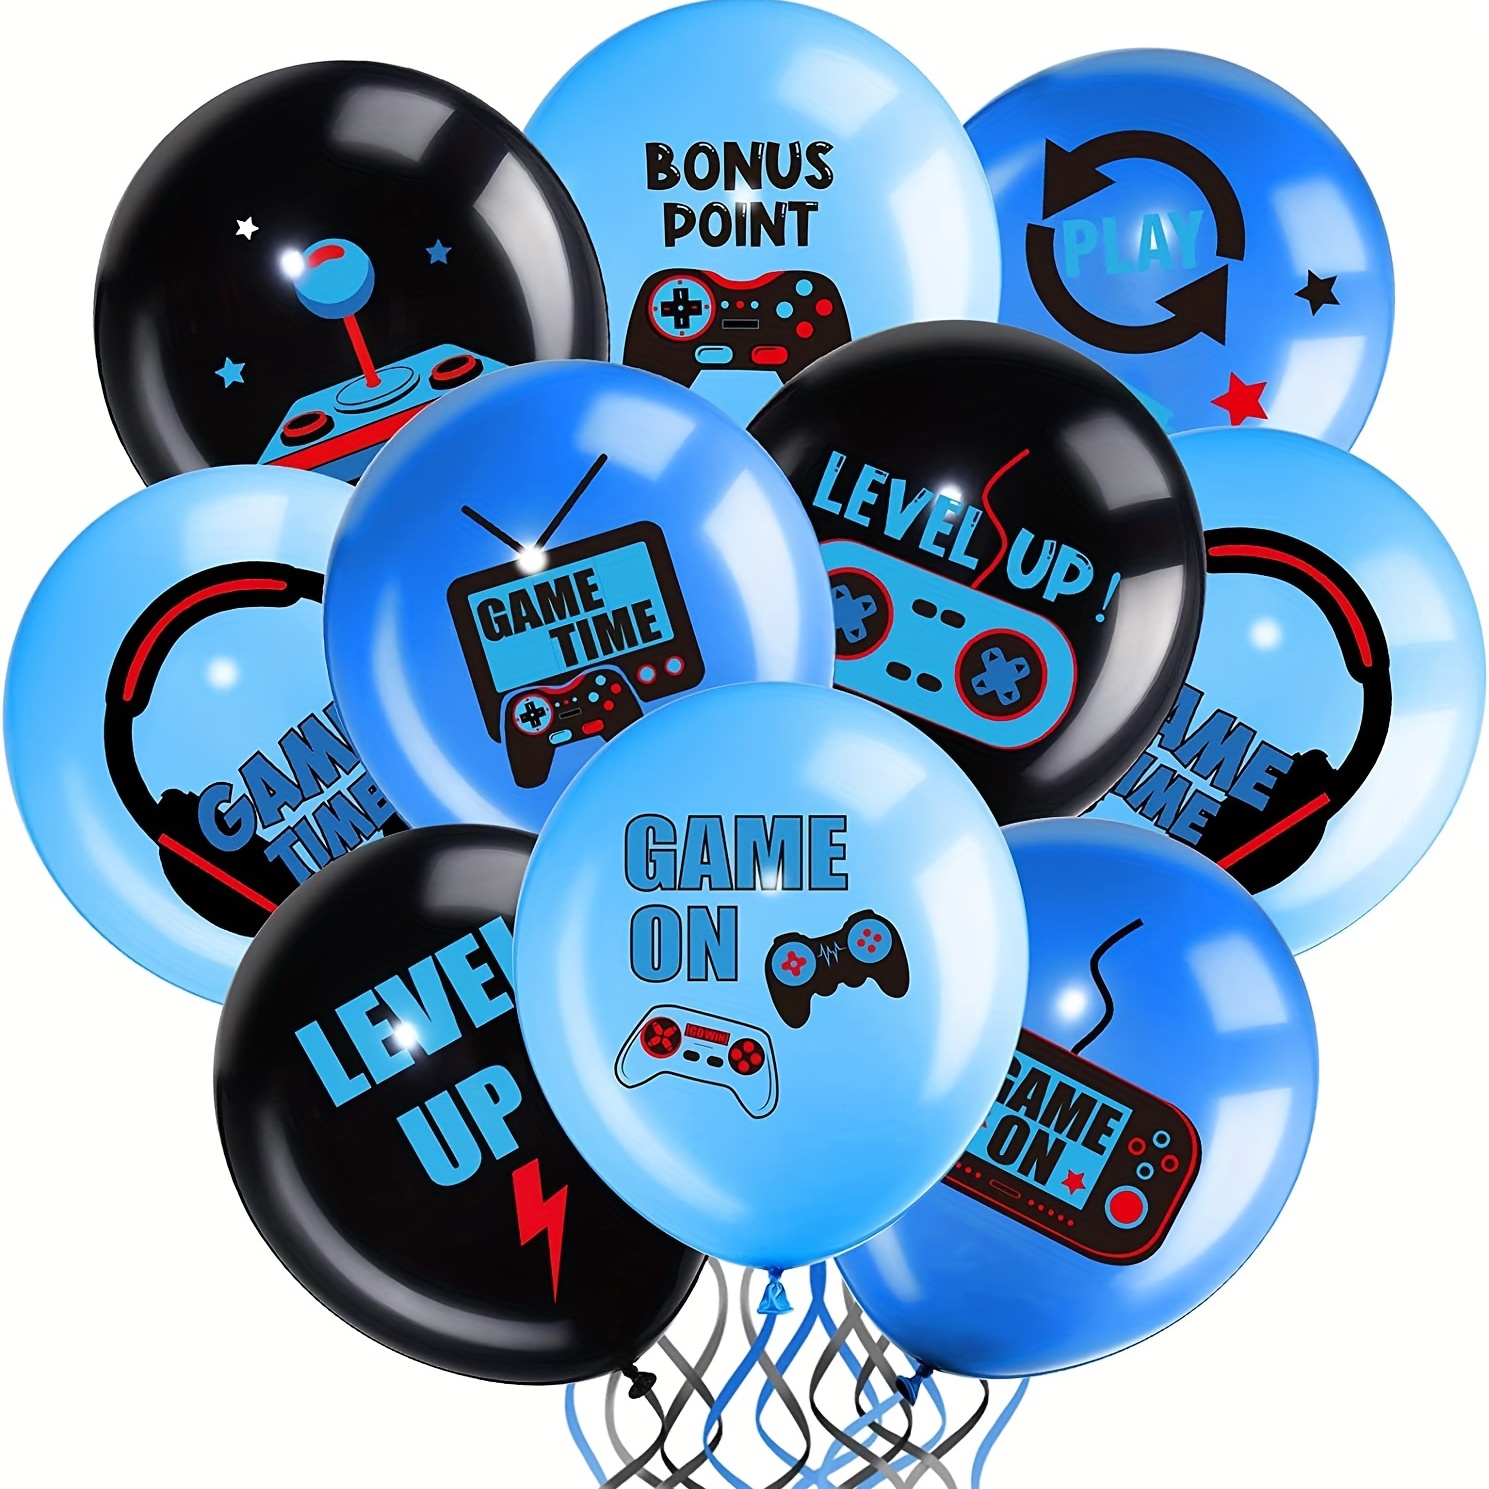 

18pcs 12 Video Game Party Balloons - Perfect Decorations For Teens' Gamer Birthday Party! (black & Blue)